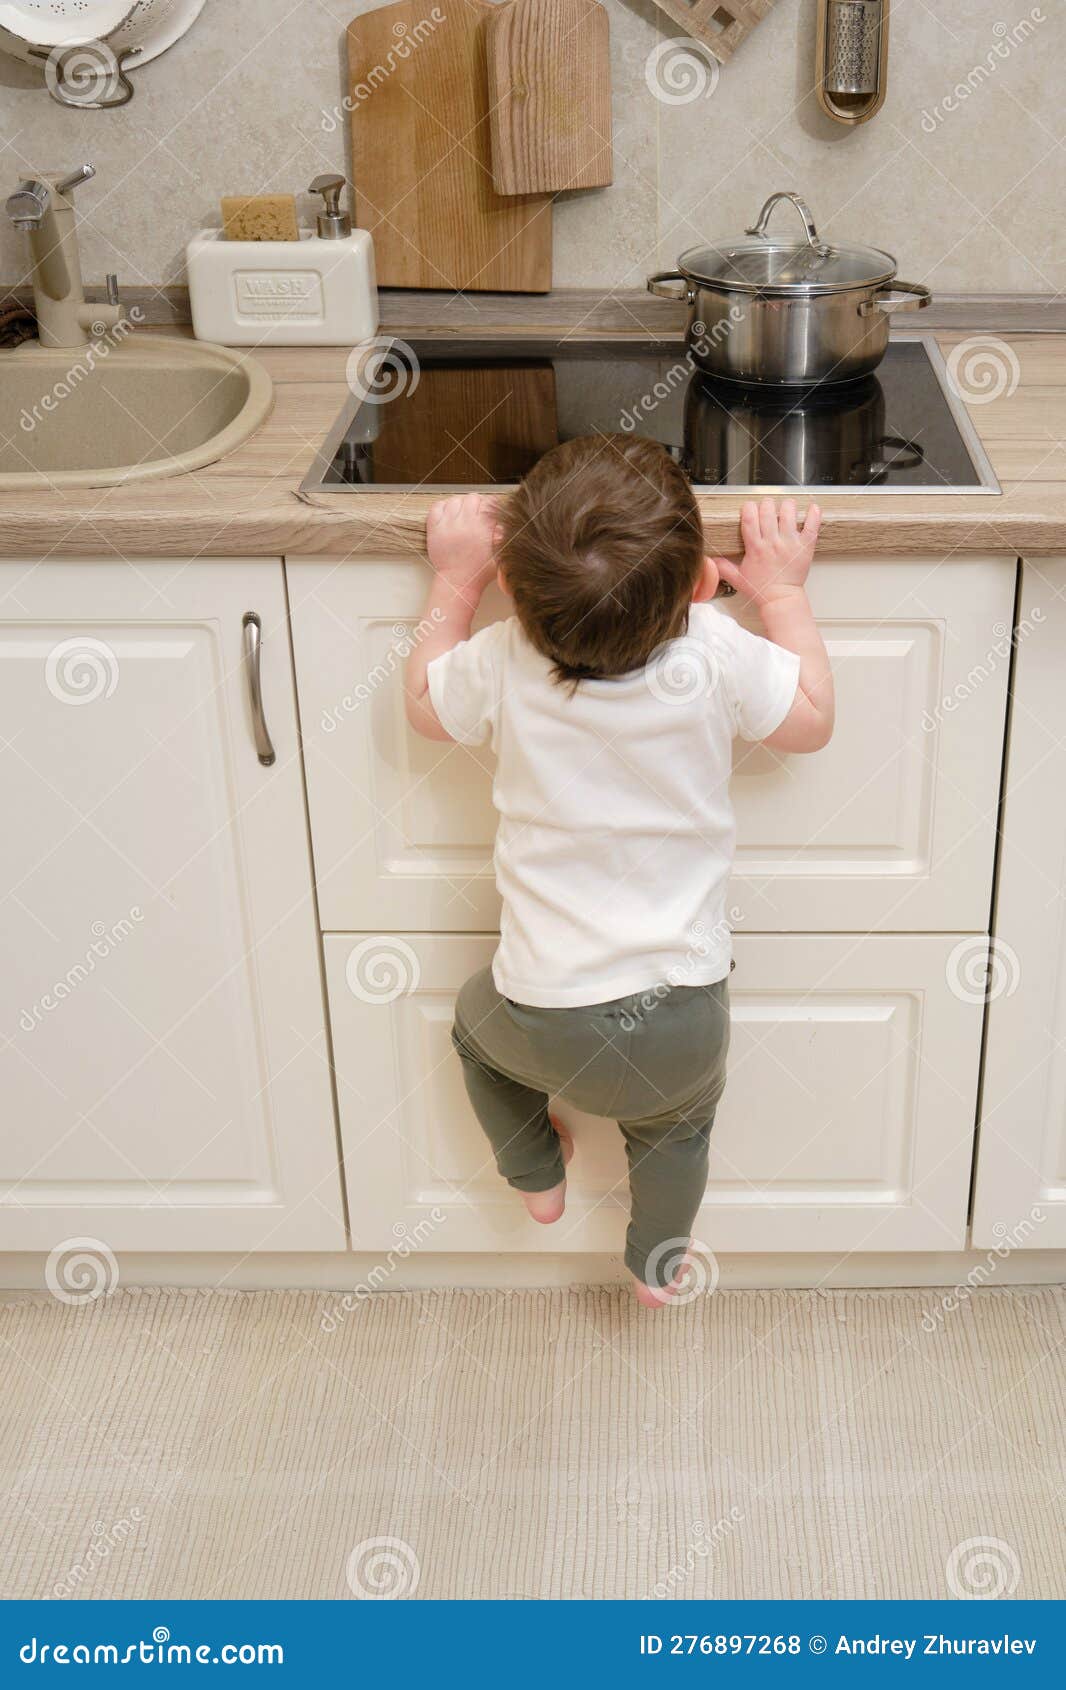 https://thumbs.dreamstime.com/z/toddler-baby-climbs-hot-electric-stove-home-kitchen-small-child-touches-surface-stove-his-hand-276897268.jpg